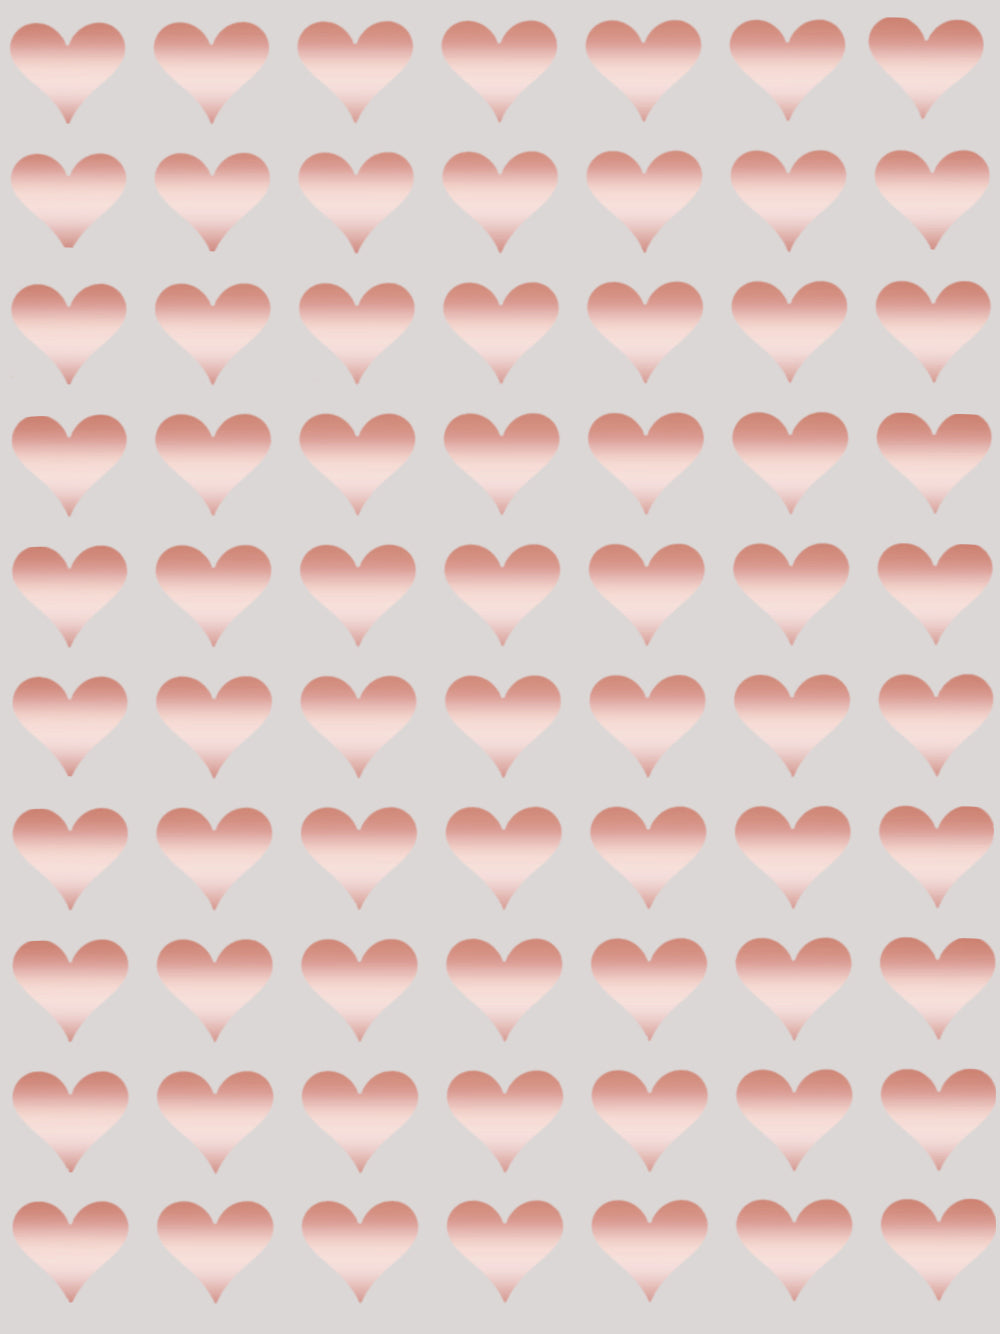 Small Pink Heart Stickers 1/2 Wide